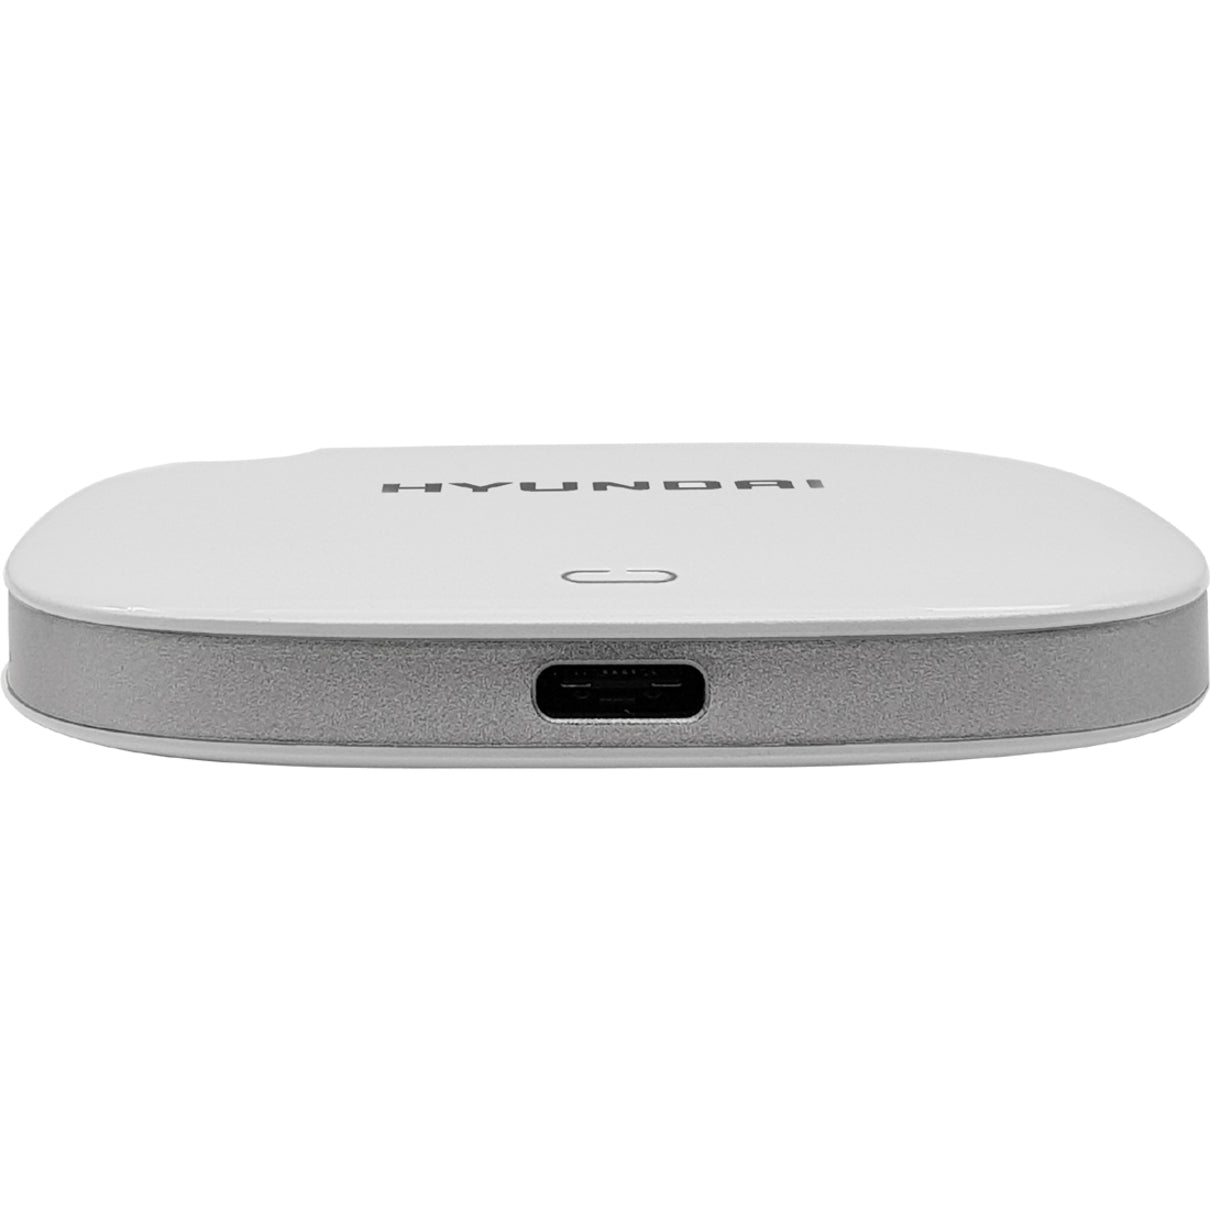 Hyundai HTESD1024PW Solid State Drive, 1TB External SSD USB 3.1 Type-C, 5 Year Warranty, Pearl White